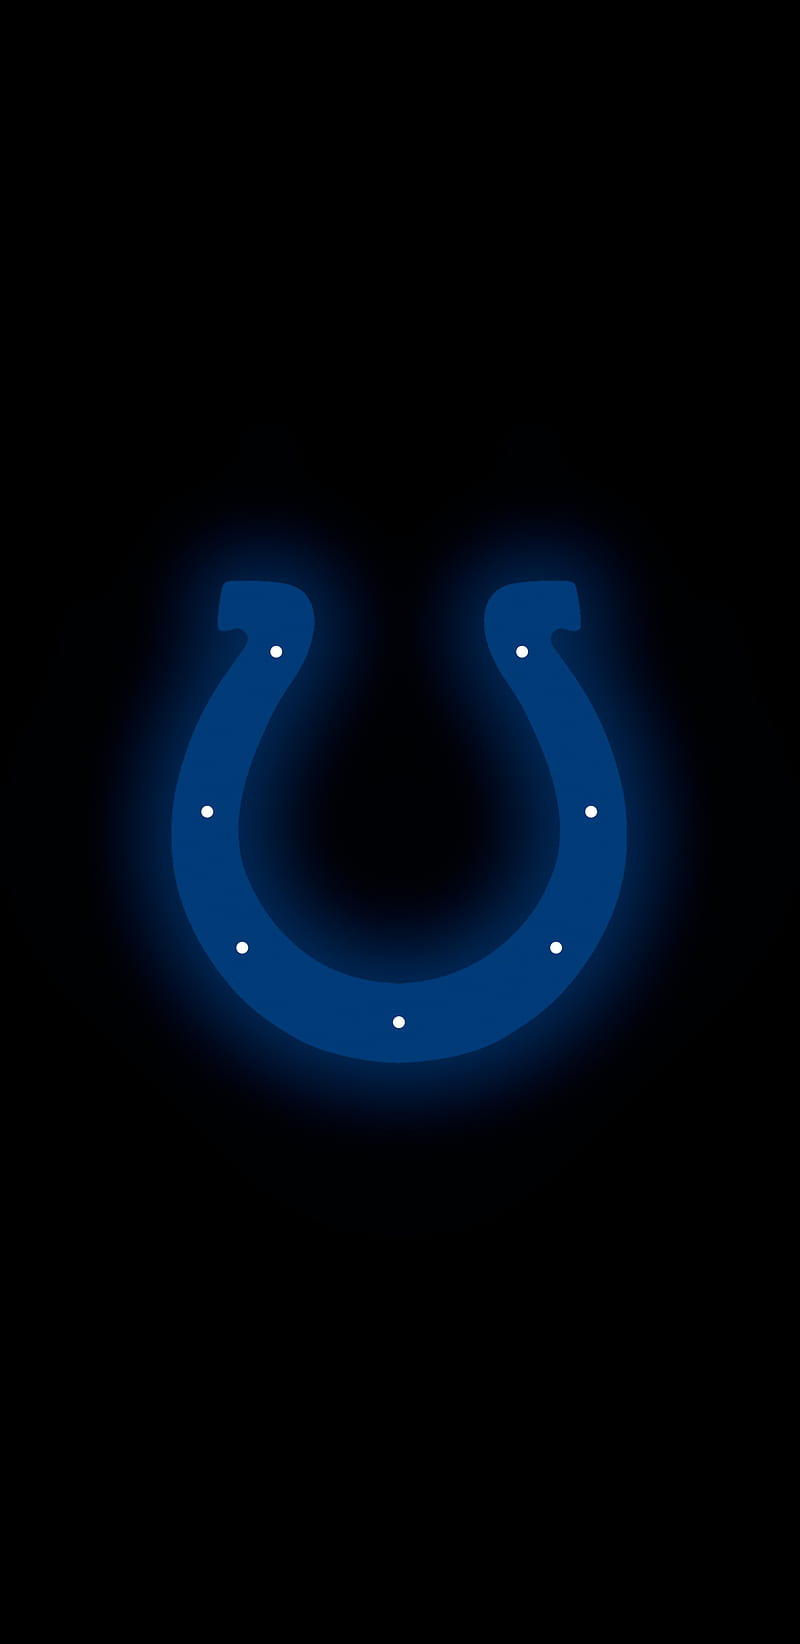 2020 Indianapolis Colts Wallpapers on Behance